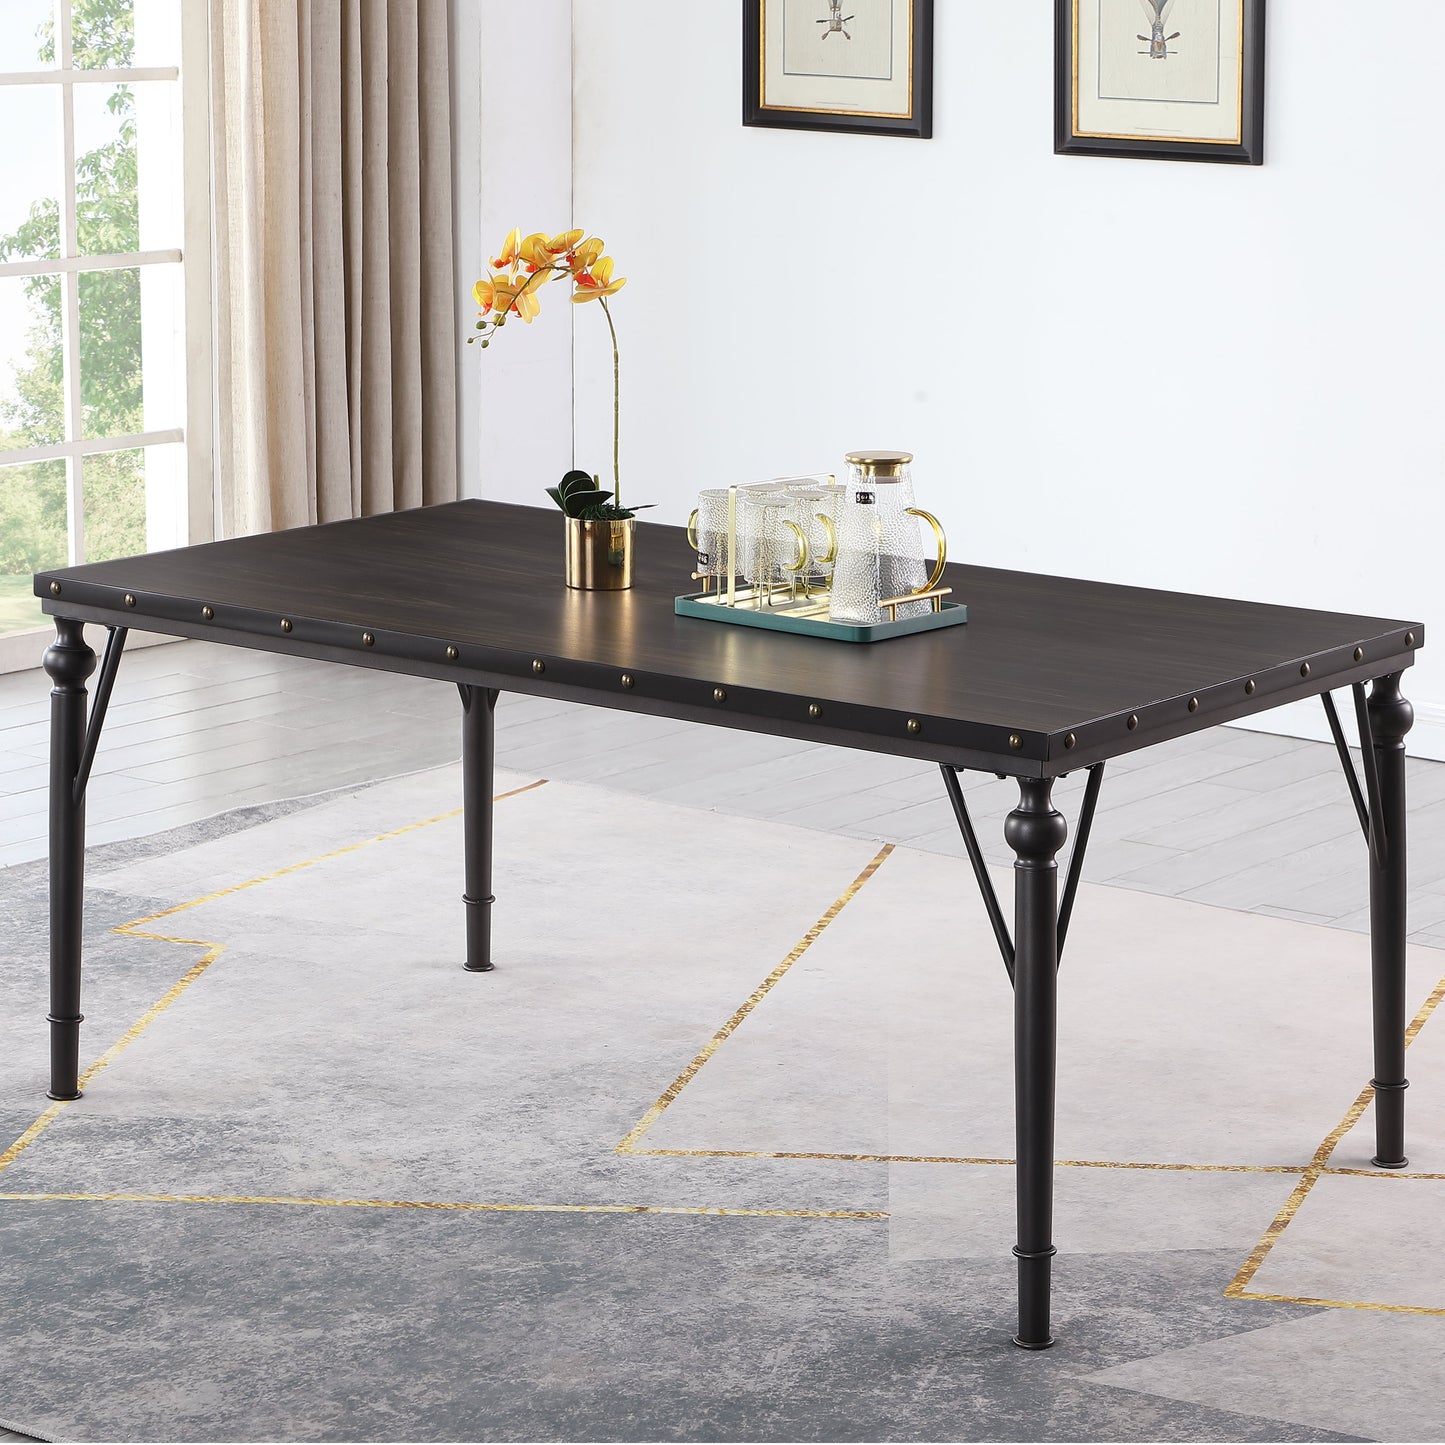 Biony Nailhead Espresso Wood Dining Table with Metal Frame